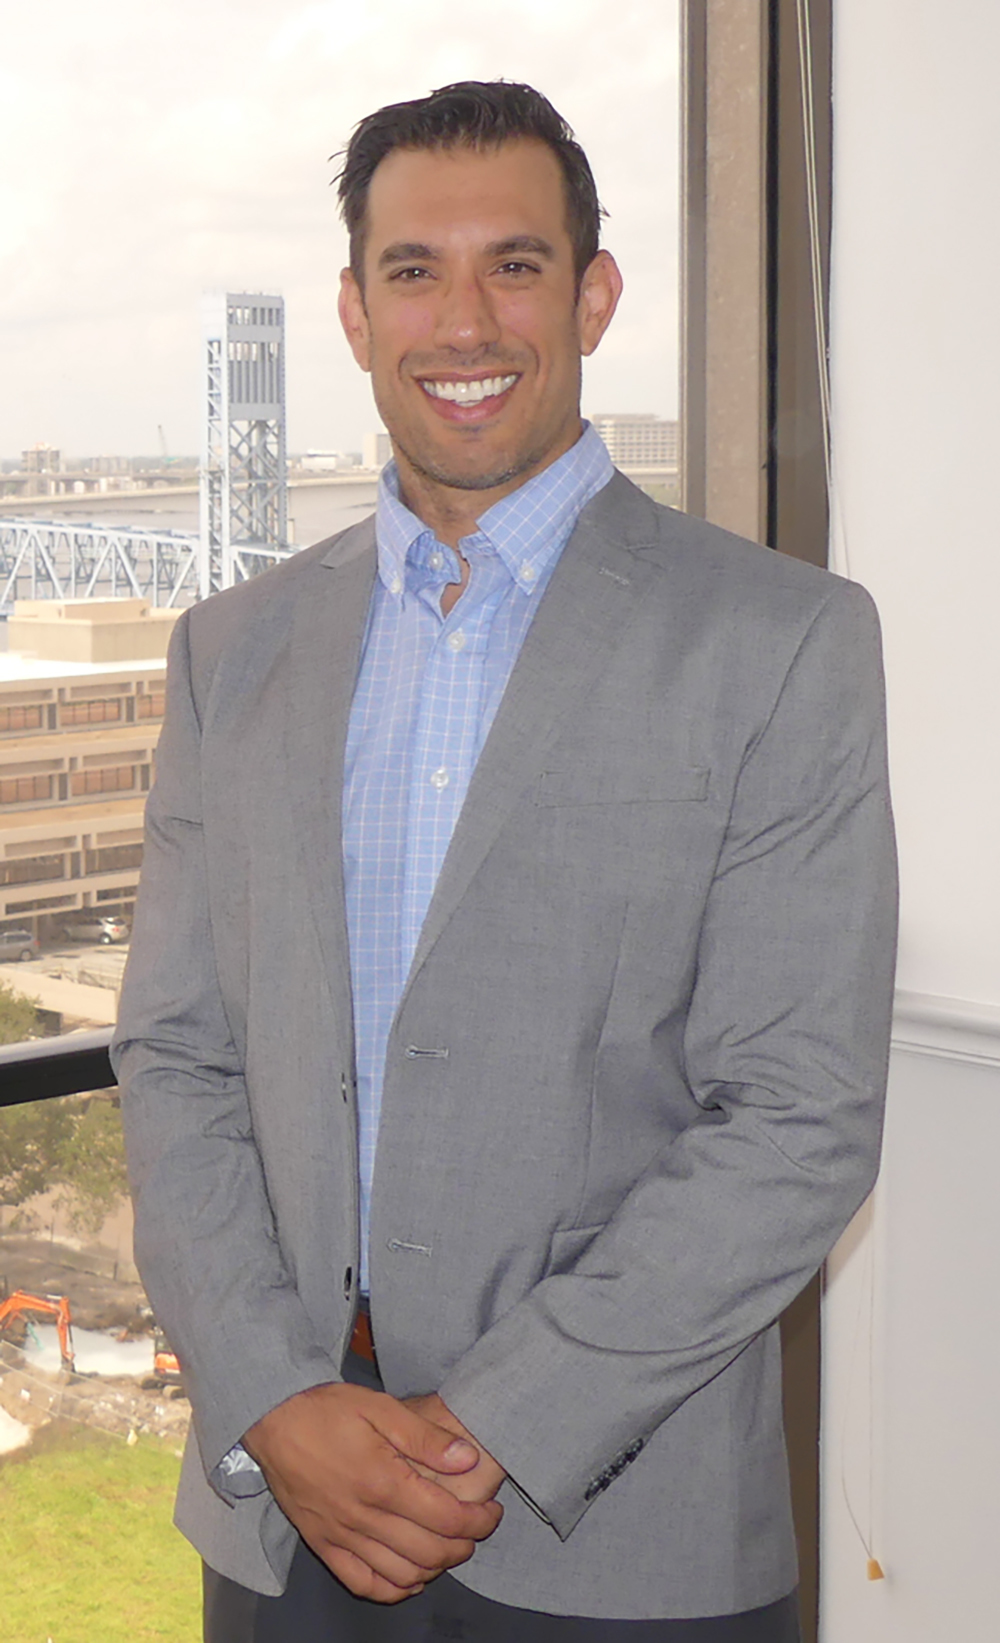 Andrew Sodl of Downtown-based commercial real estate law firm Sodl & Ingram.